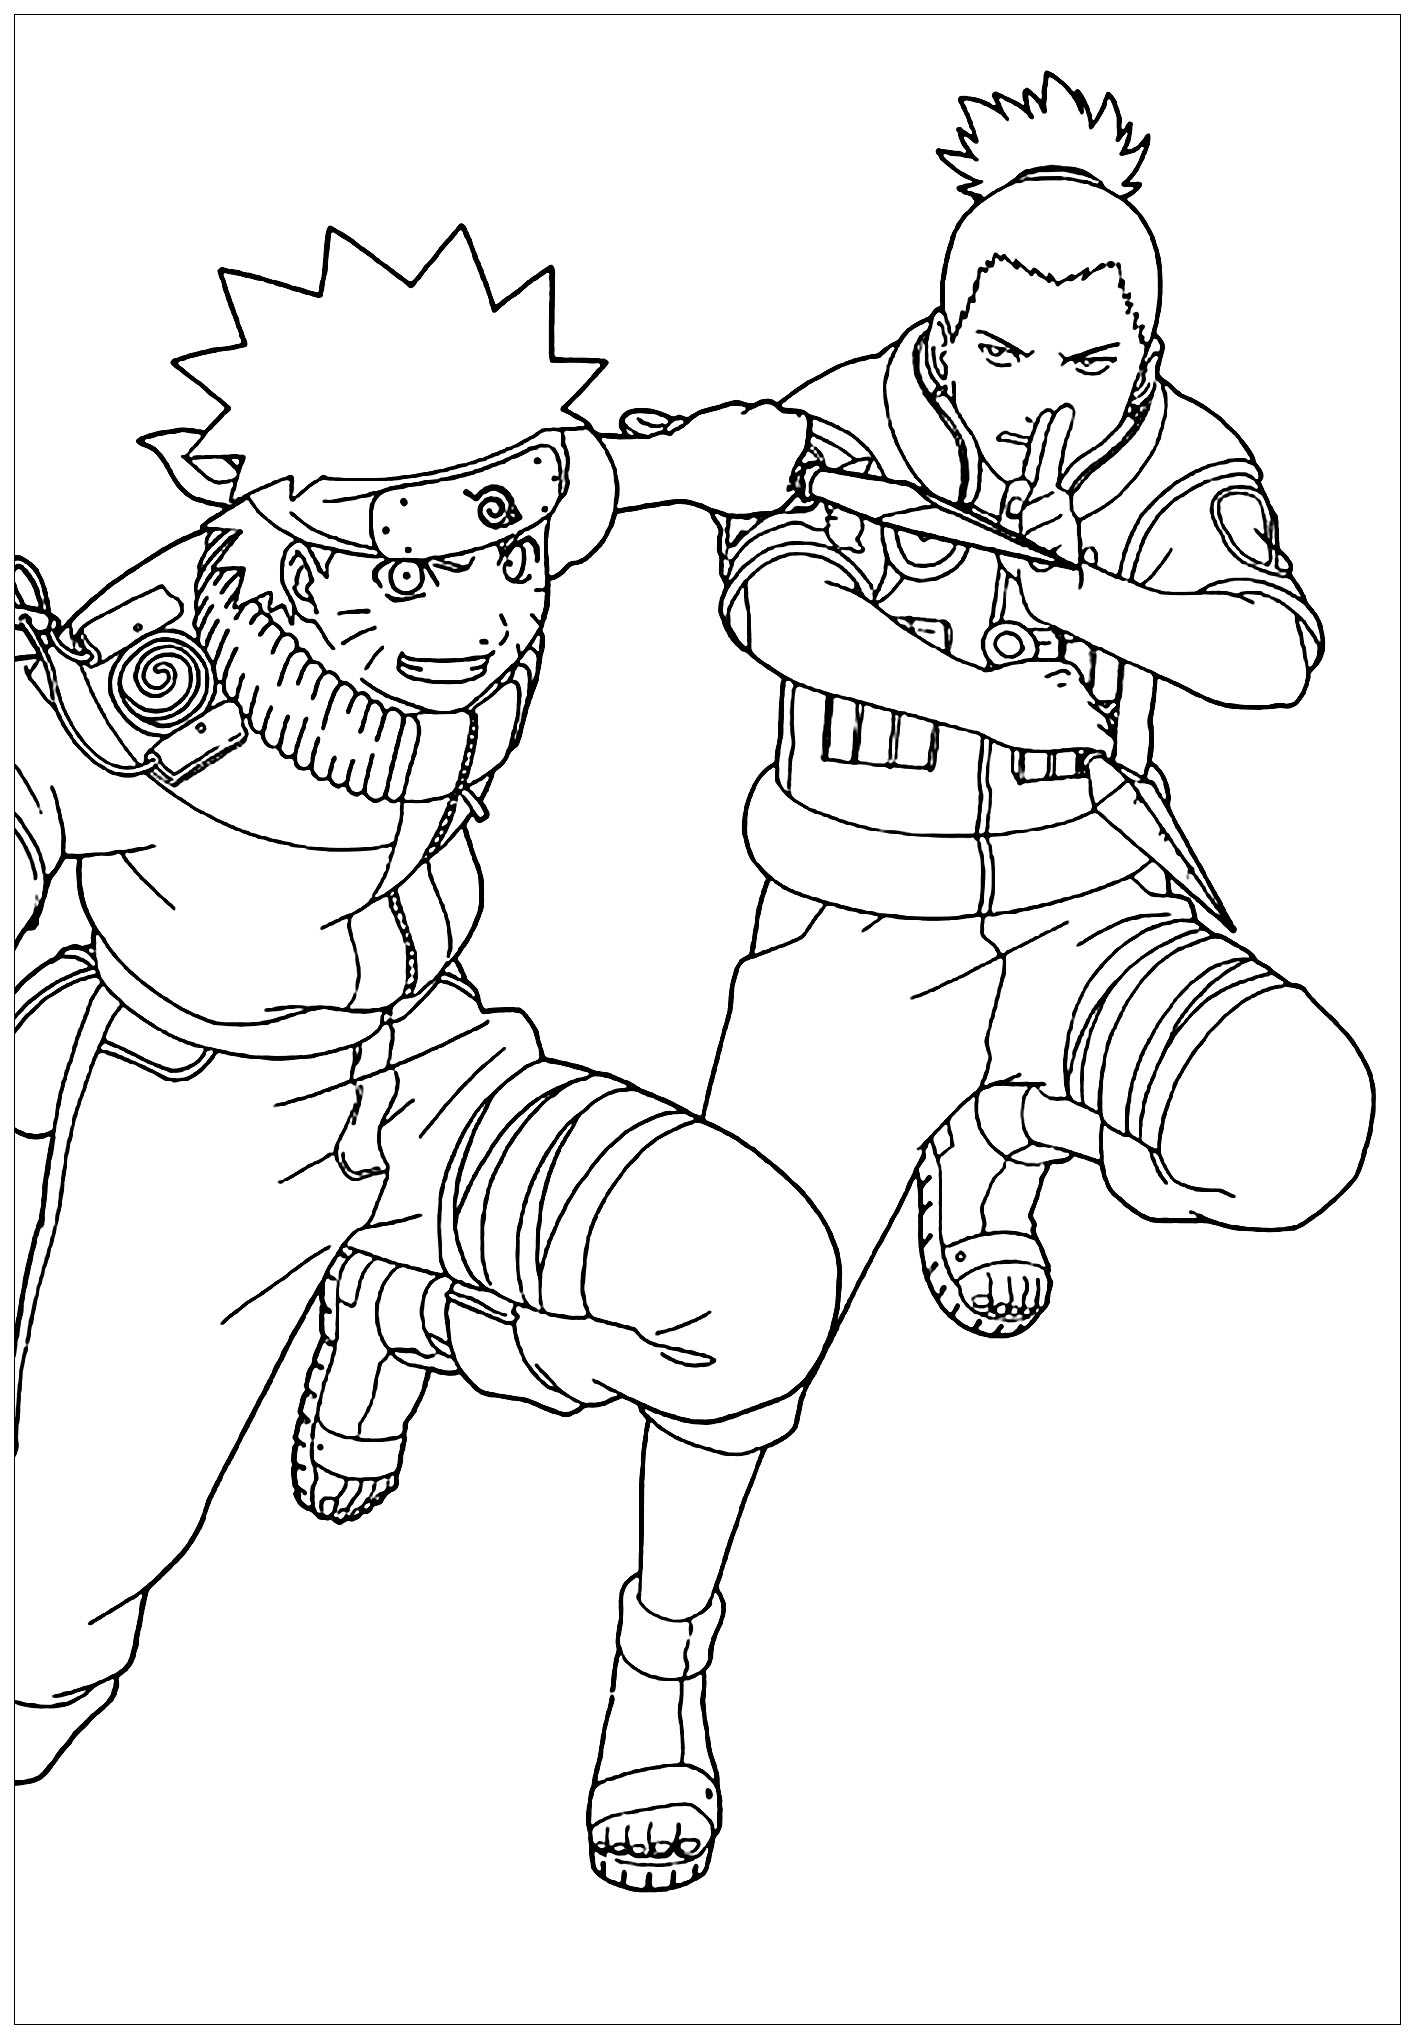 Download Naruto to color for children - Naruto Kids Coloring Pages